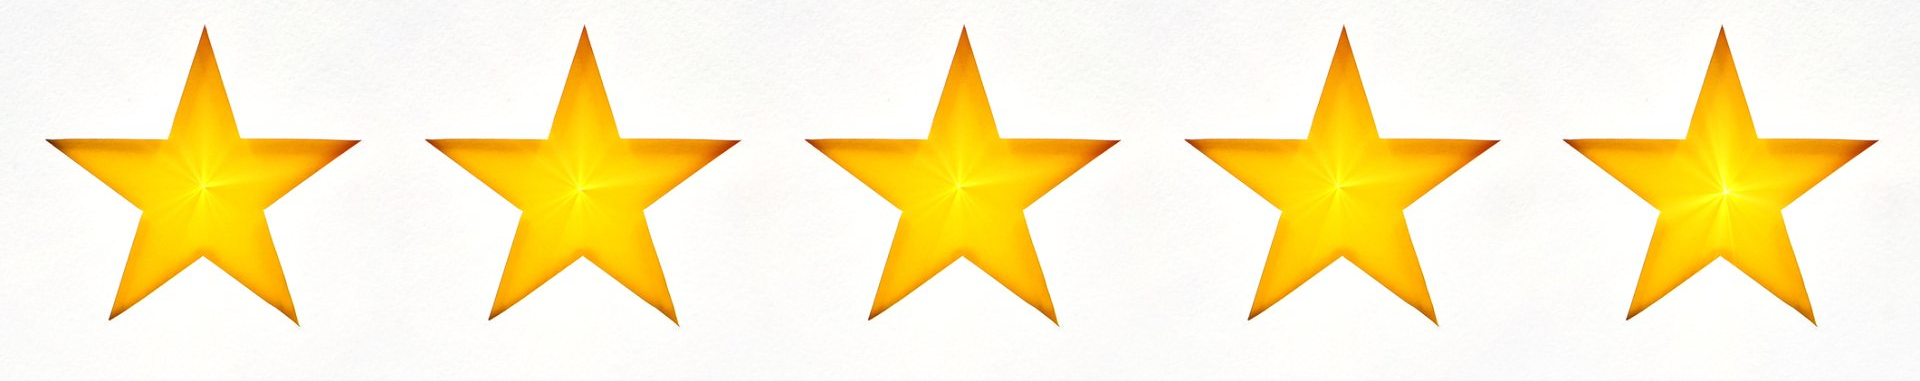 a row of five yellow stars on a white background .